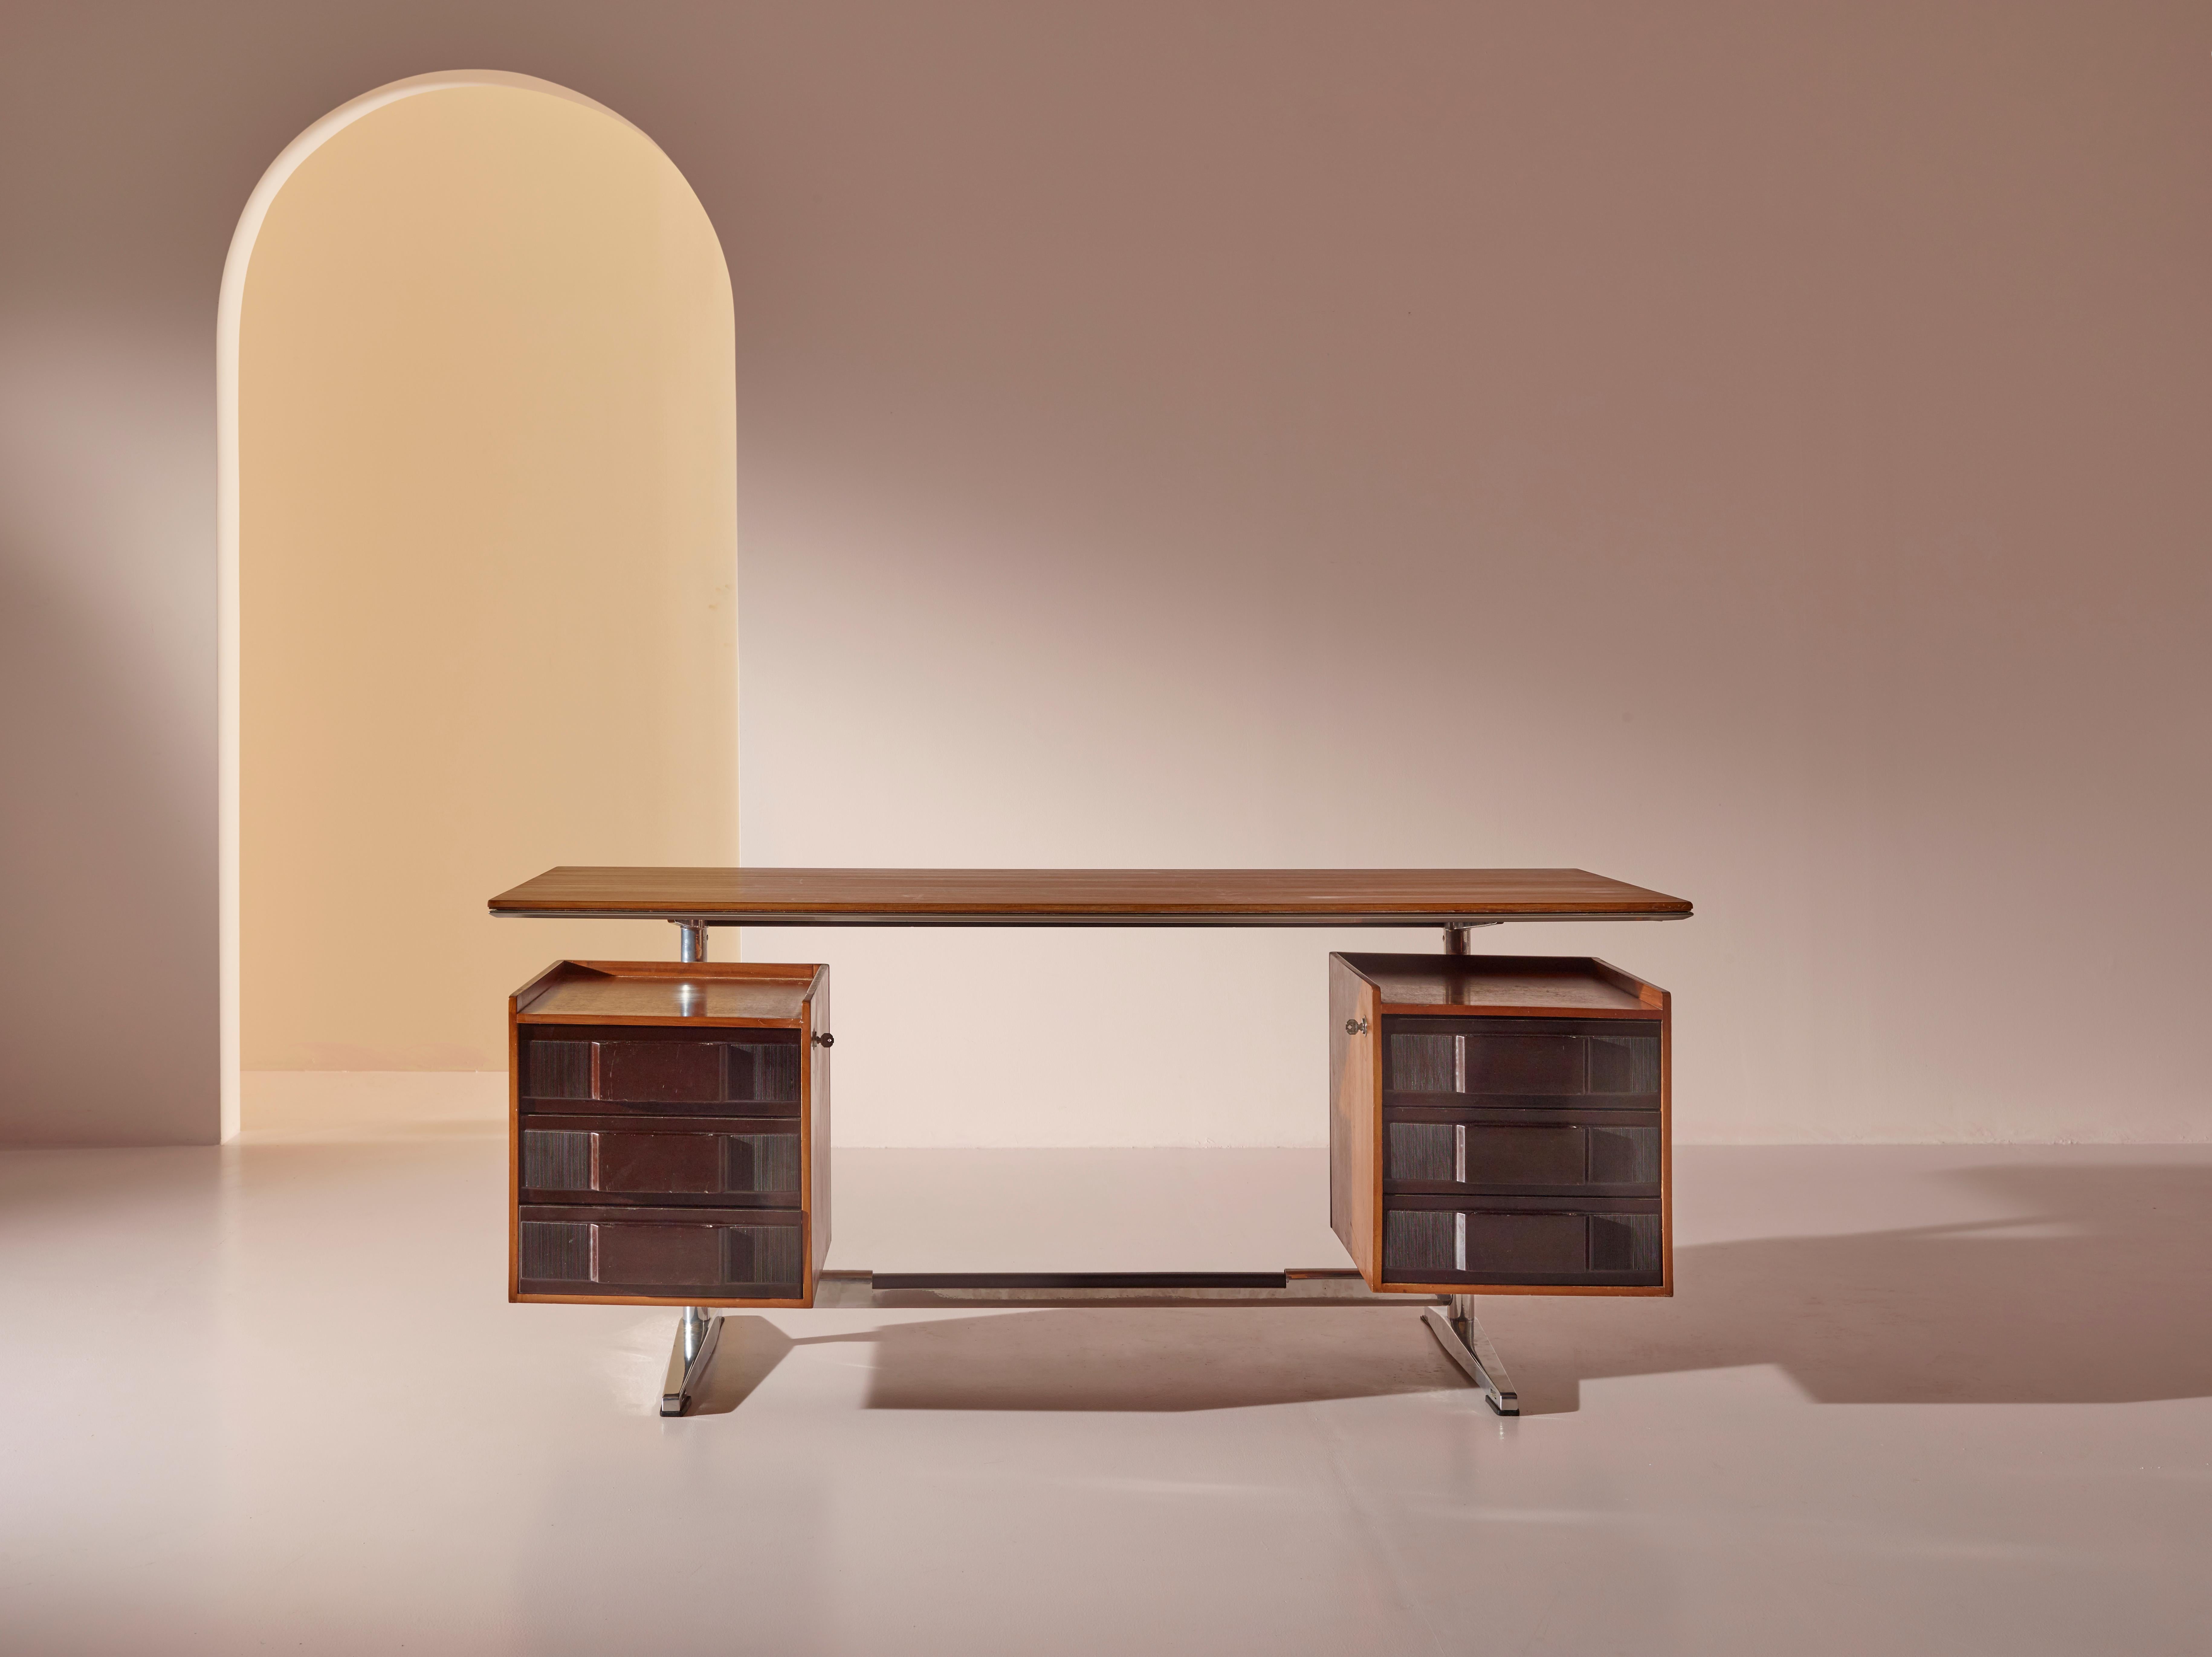 This writing desk, designed by renowned architect Gio Ponti in 1956, was specifically created for the Pirelli tower offices. The desk's dimensions are H. 75.5 x 170 x 75.5 cm, offering a spacious and functional work surface.

Manufactured by Rima,